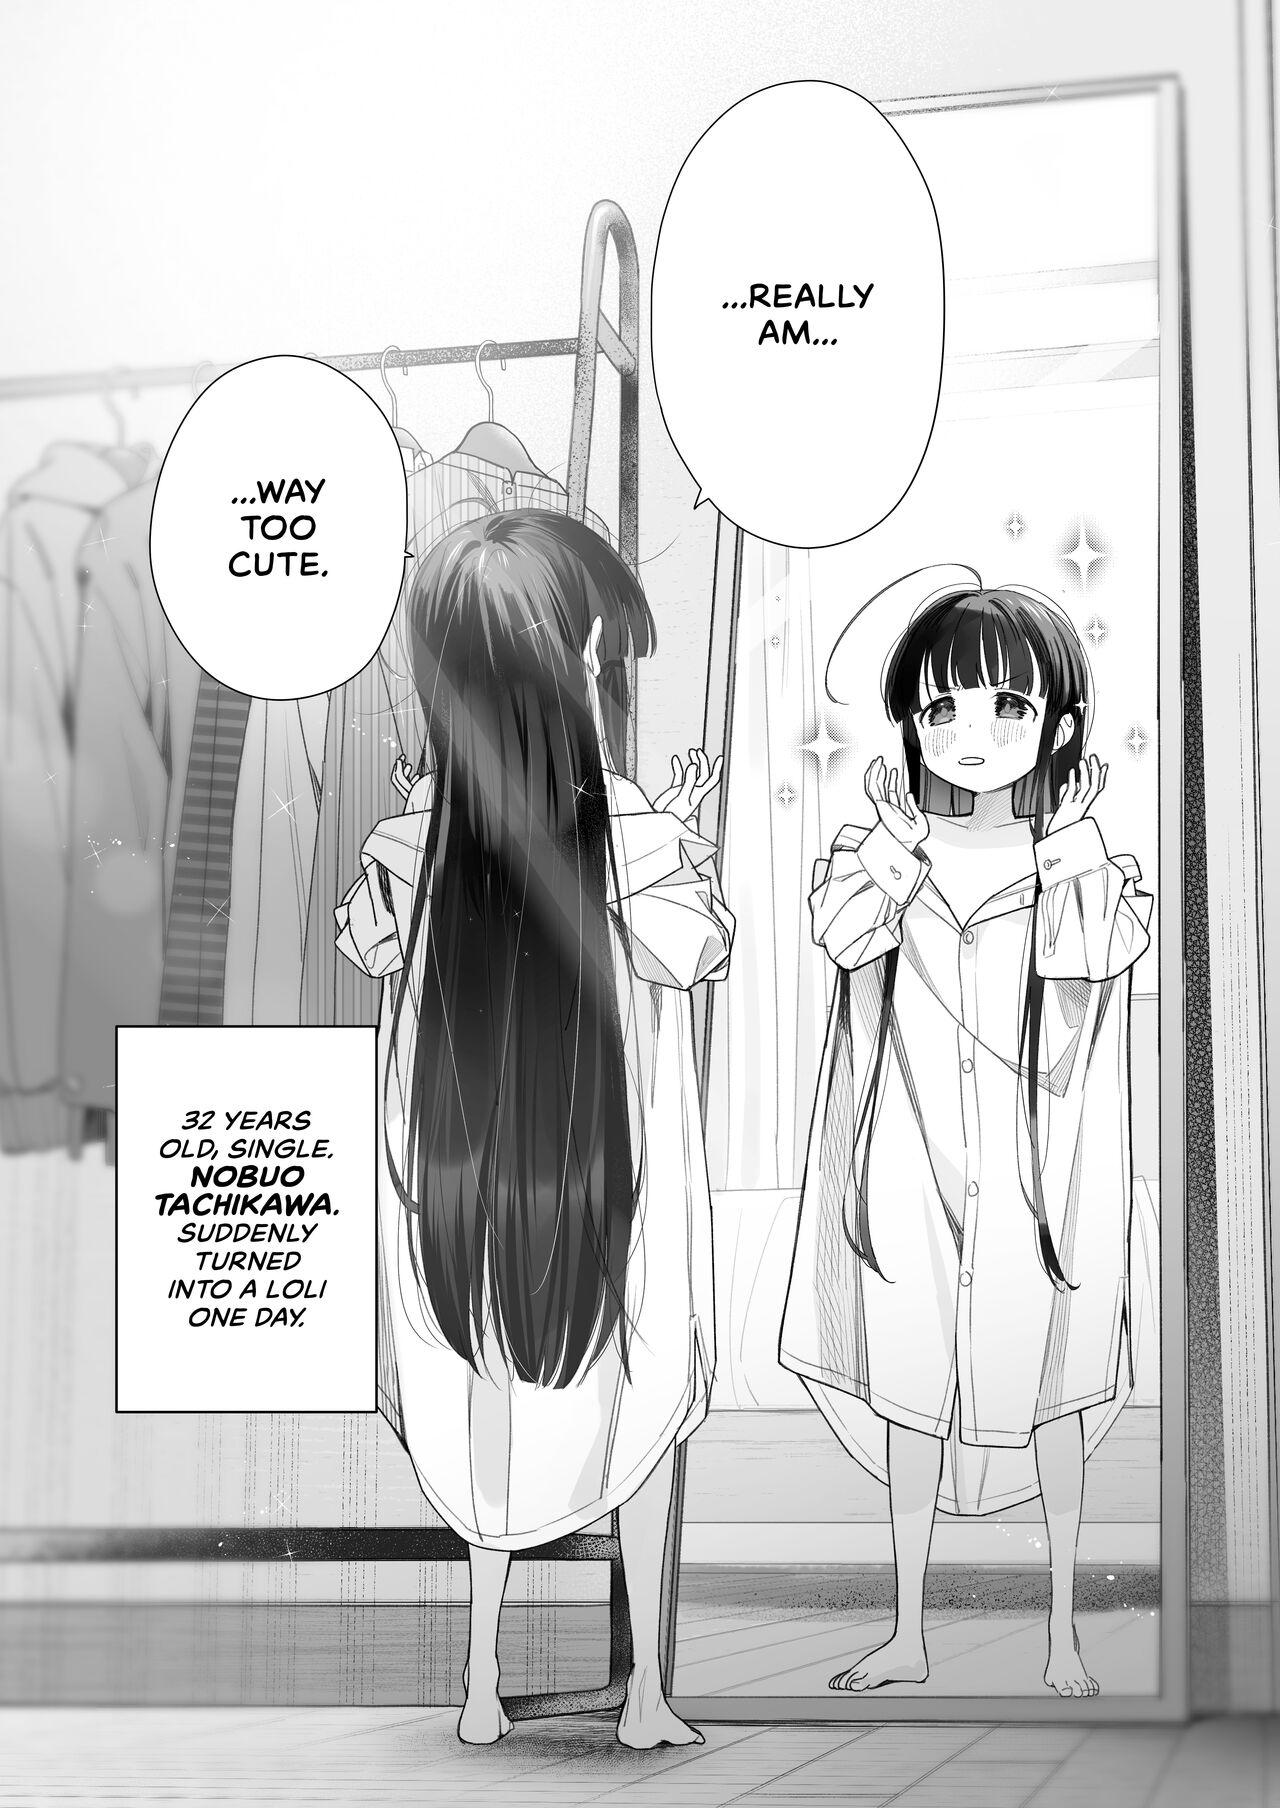 Free Porn Amateur [Asunaro Neat. (Ronna)] TS Loli Oji-san no Bouken Onanie Hen | The Adventures of an Old Man Who Was Gender-Swapped Into a Loli ~Masturbation Chapter~ [English] [CulturedCommissions] [Digital] - Original Travesti - Page 3